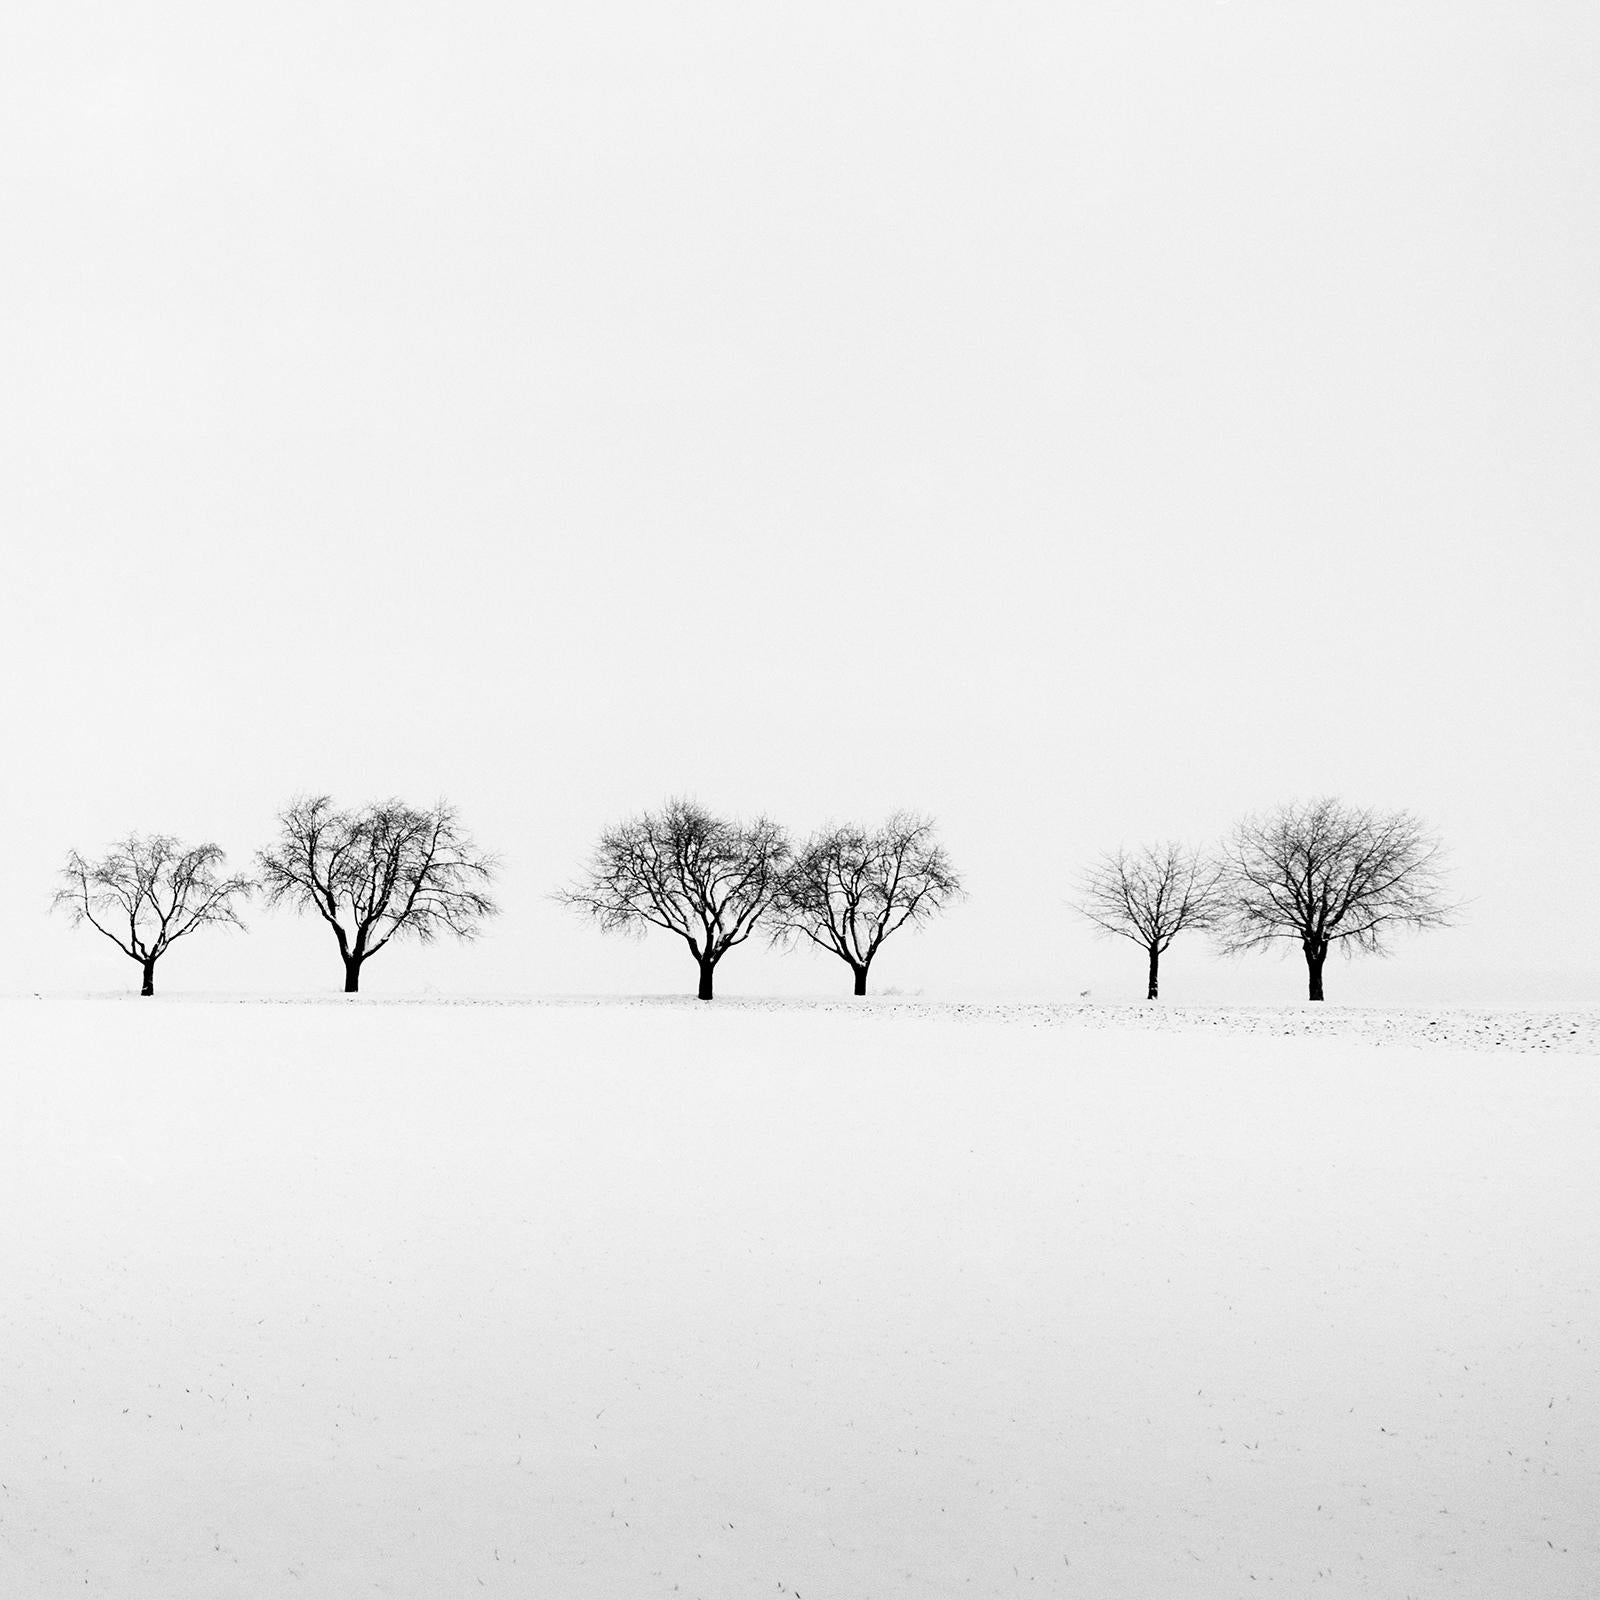 Cherry Trees in Snow Field, minimalist black and white photography, landscape For Sale 4